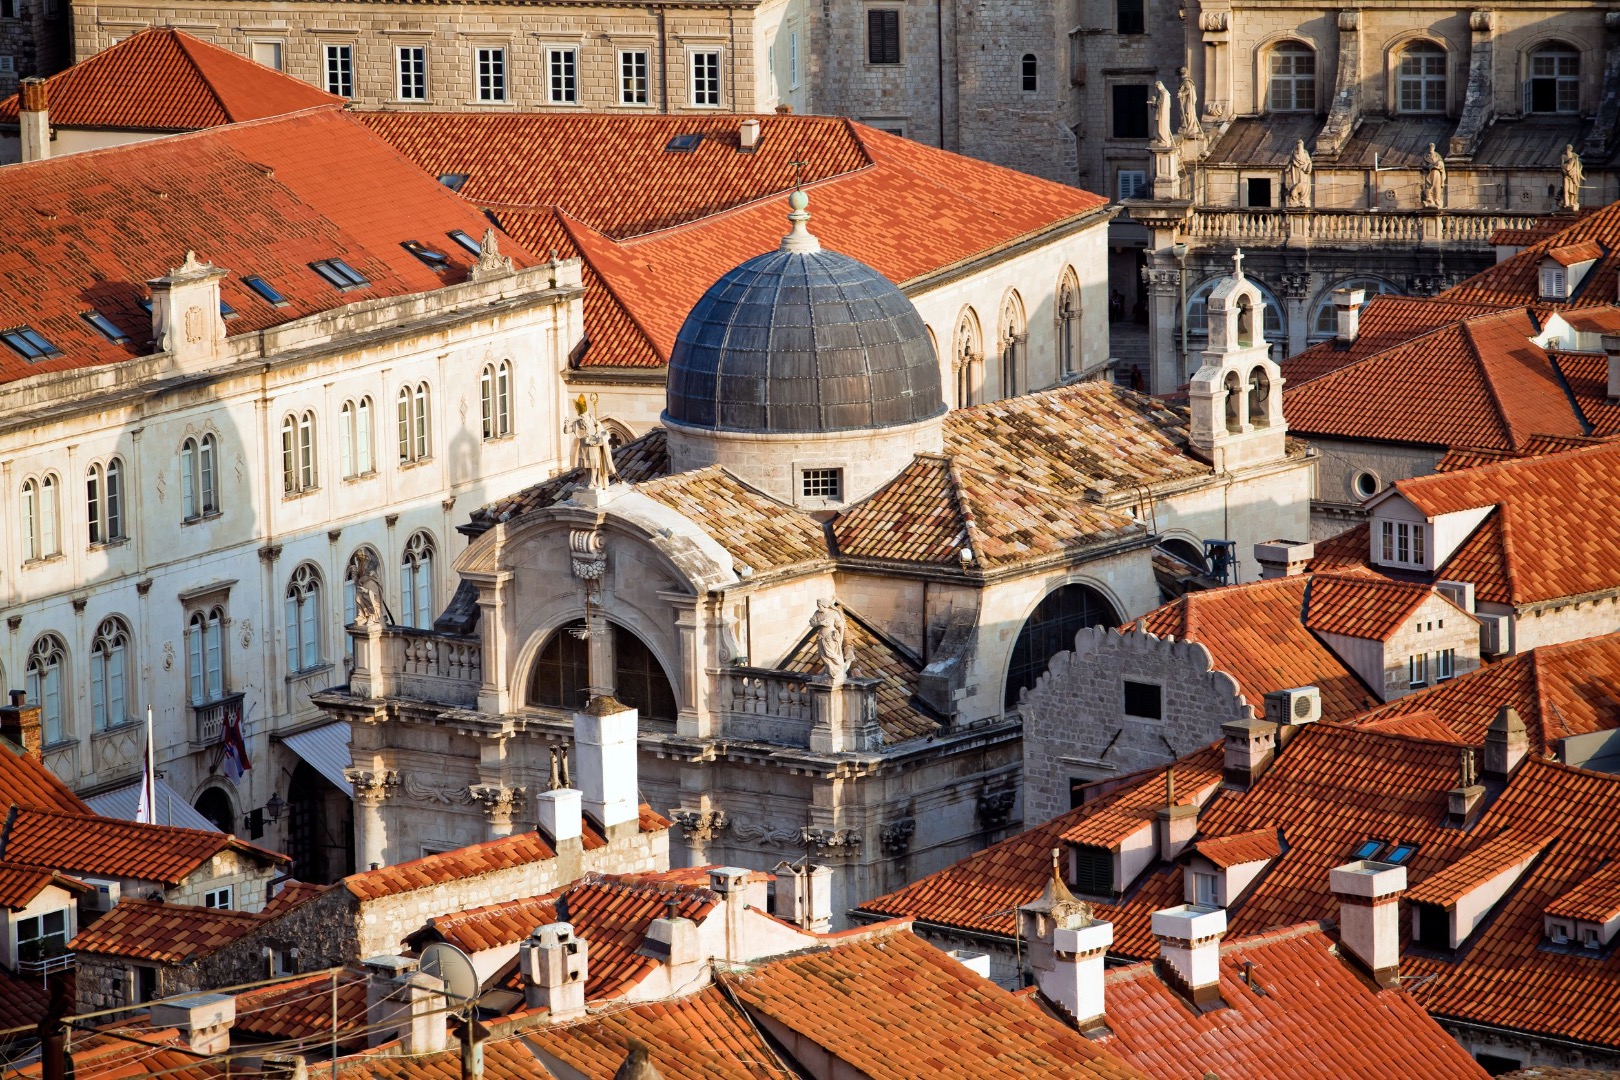 Make sure you know this before you visit Dubrovnik